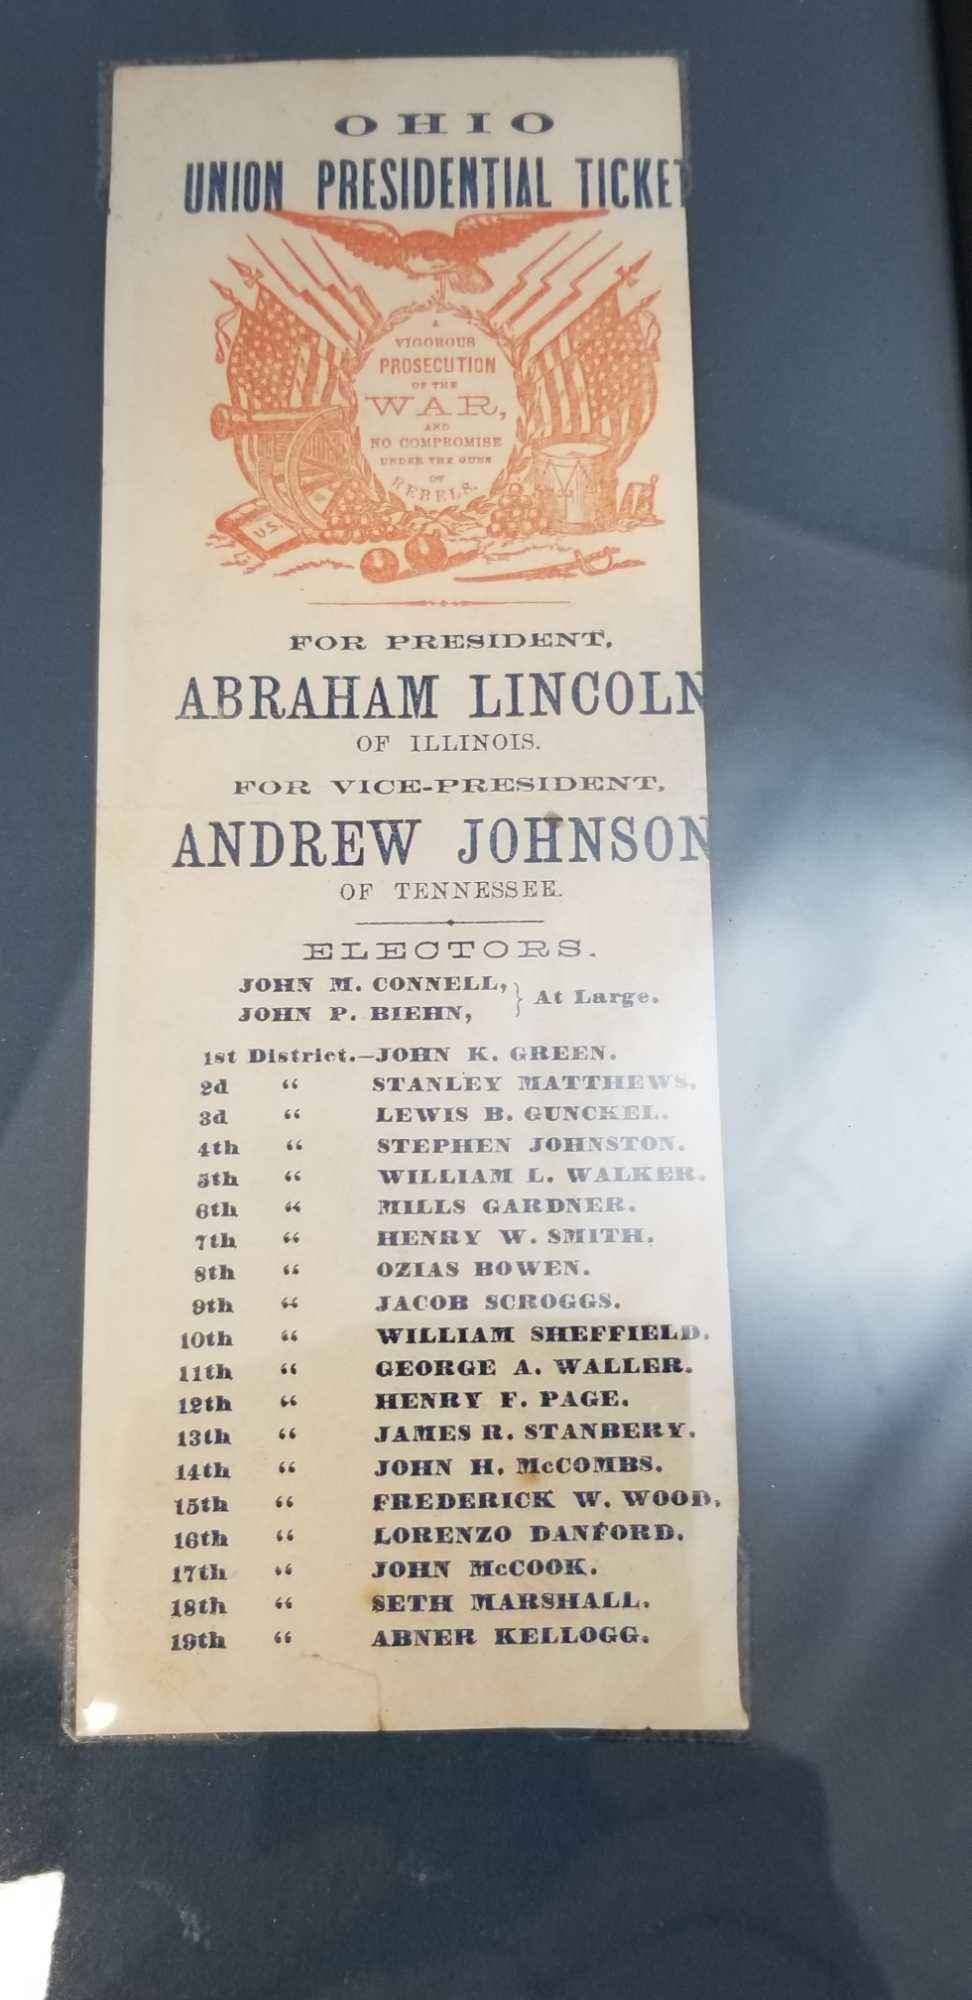 1864 Lincoln-Johnson Electoral Ticket from Ohio